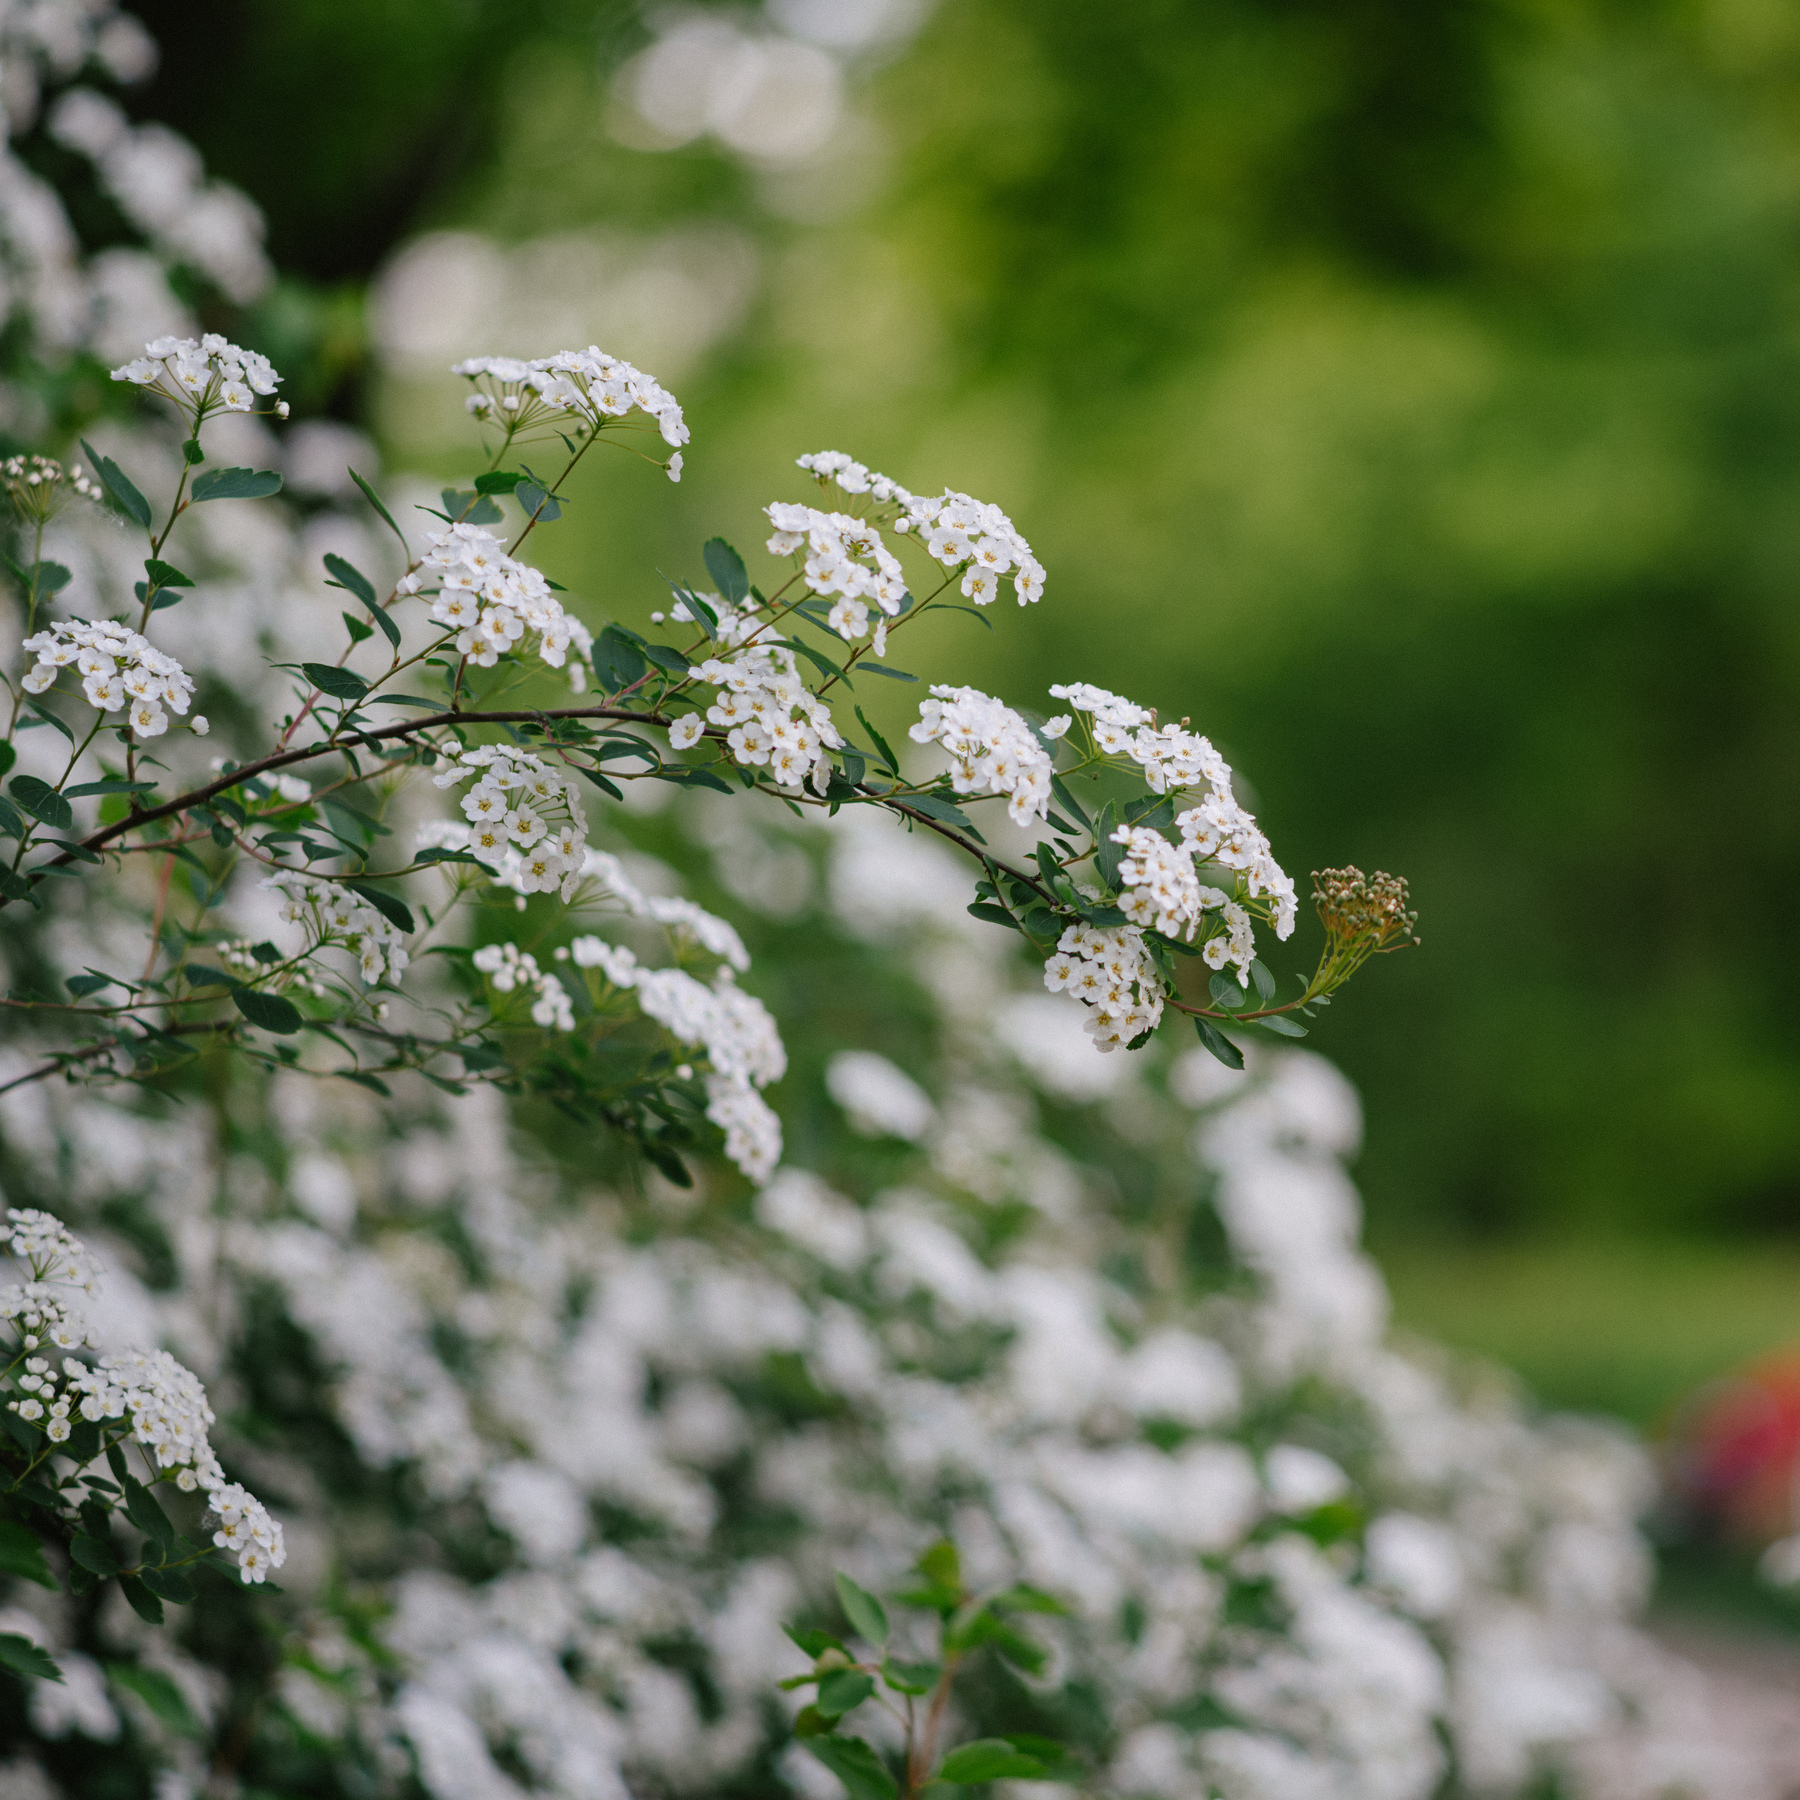 Flowers in bloom with an out of focus background of green trees and the edge of a birthday party in the park